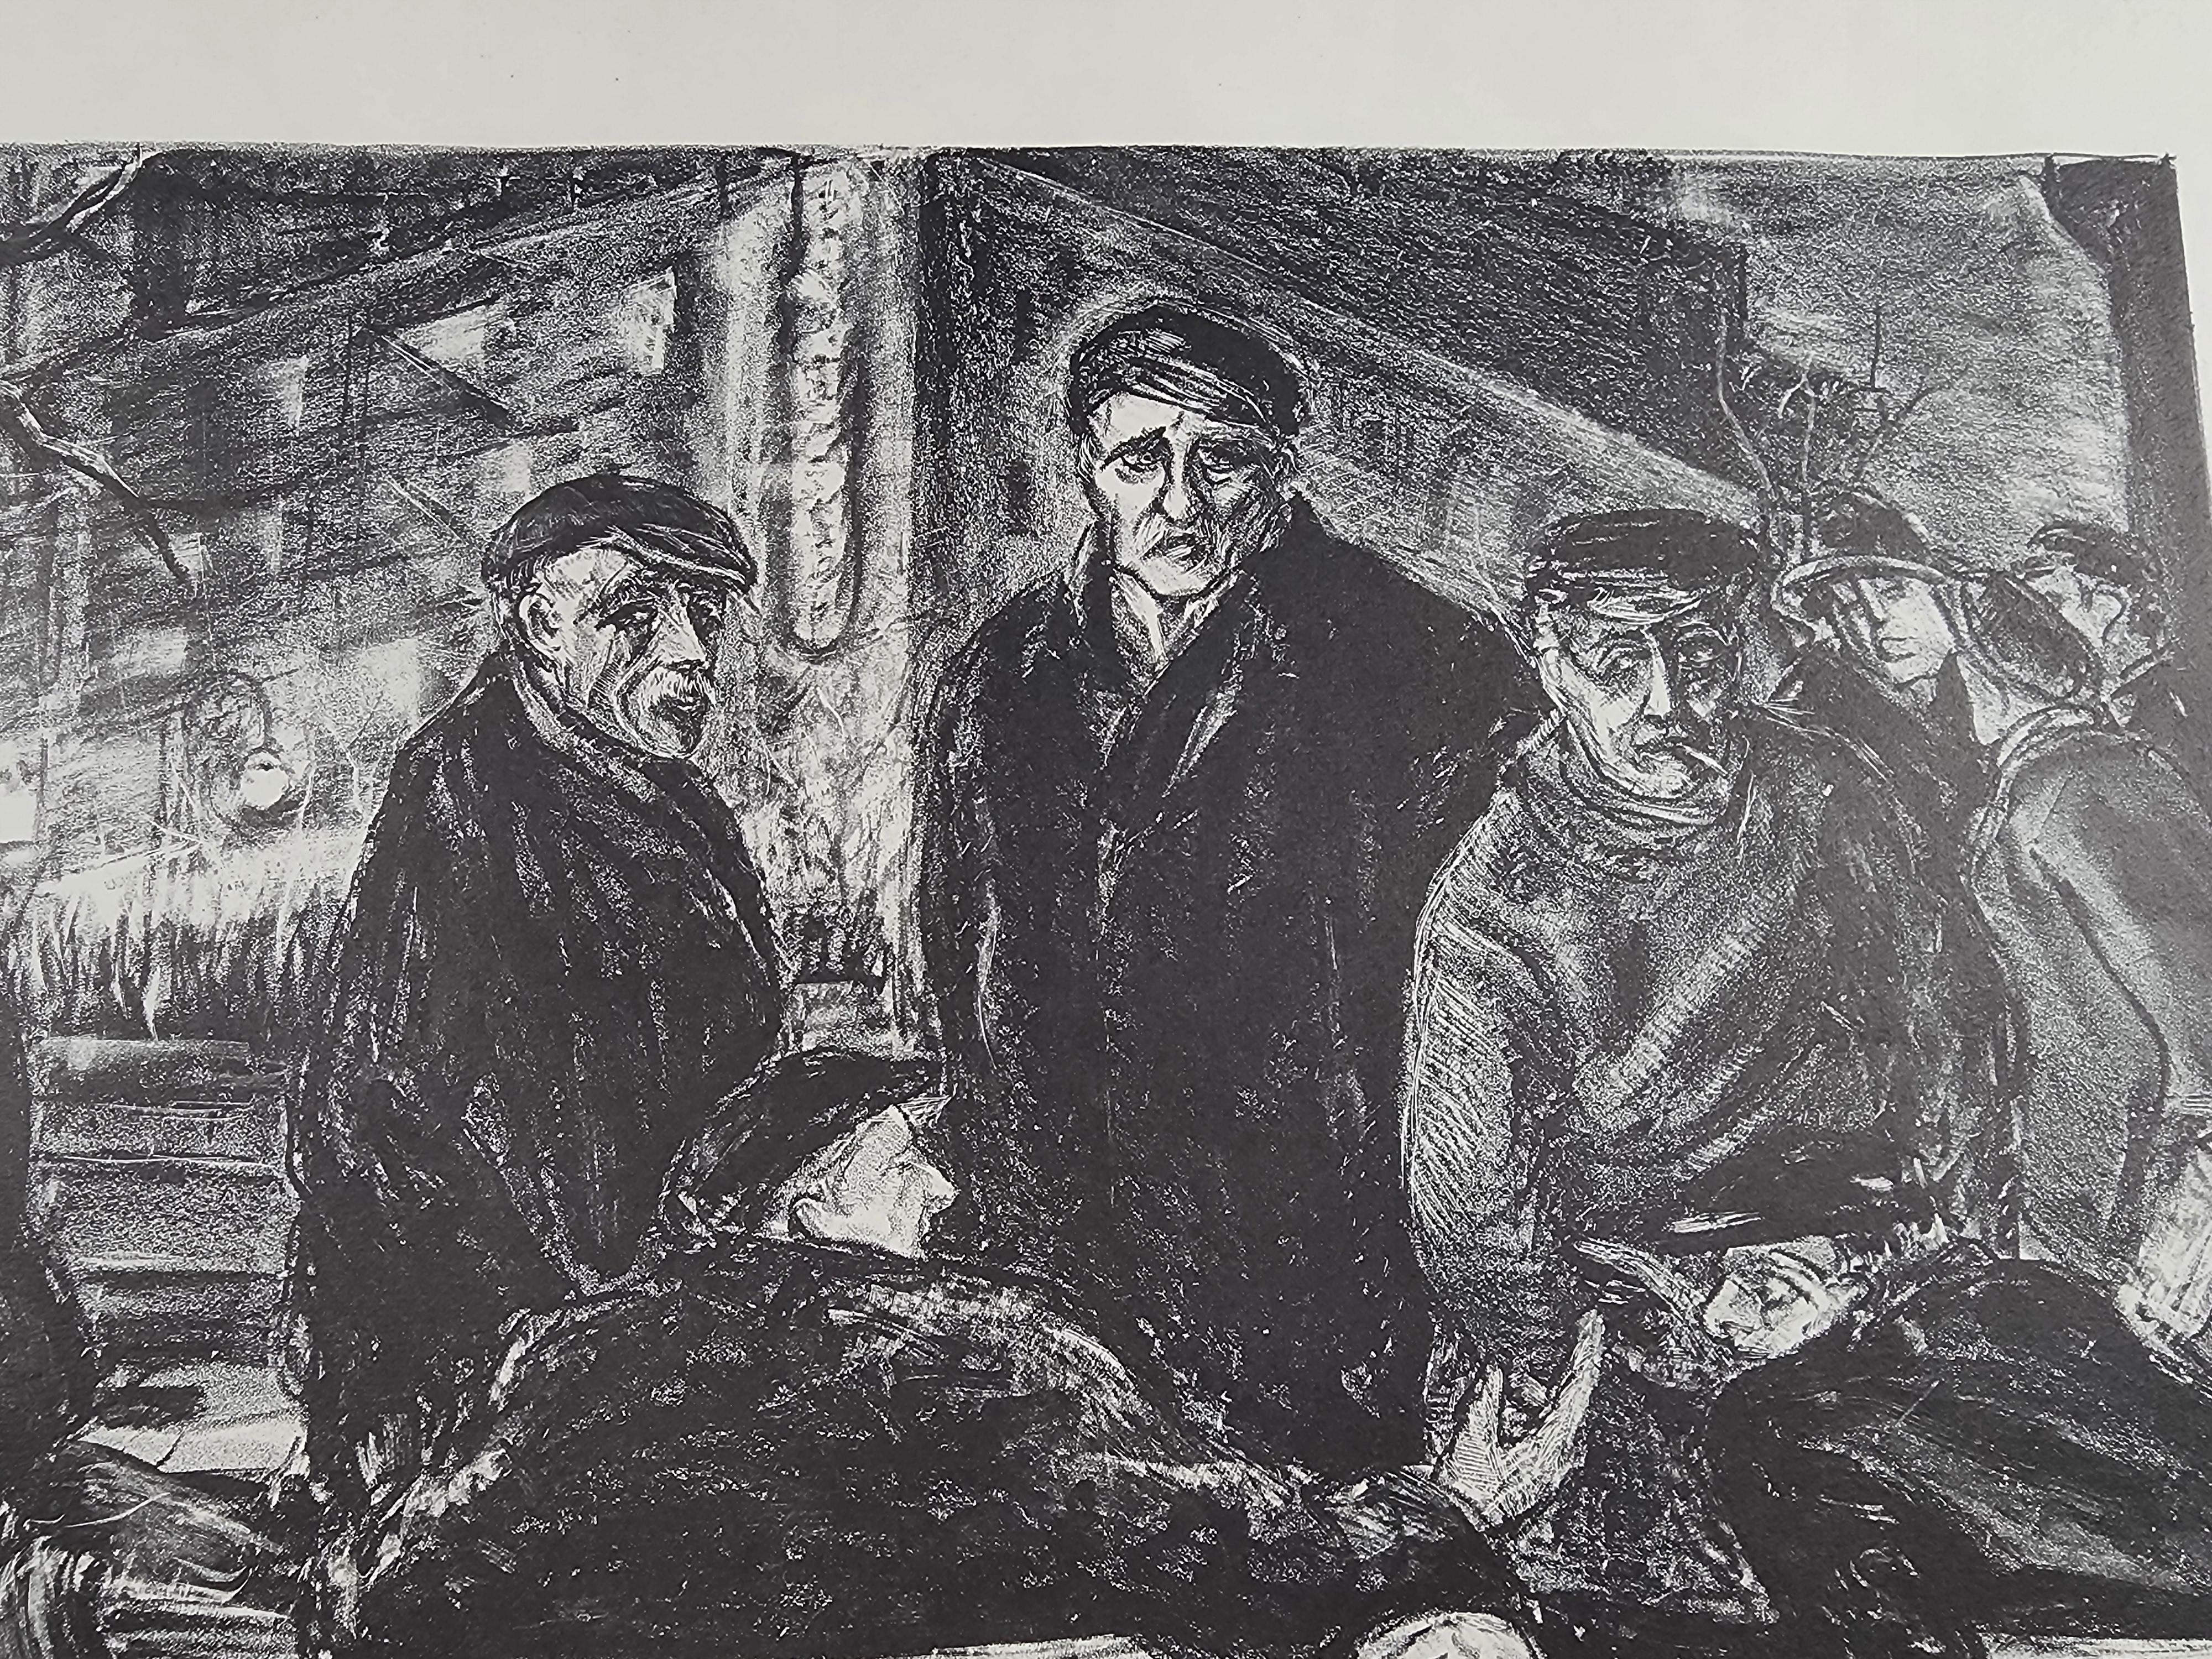 A WPA Era lithograph by Eugene Fitsch published by the American Artist School in New York, with a facsimile signature lower right below the image.
Depicted are probably unemployed men in the park.